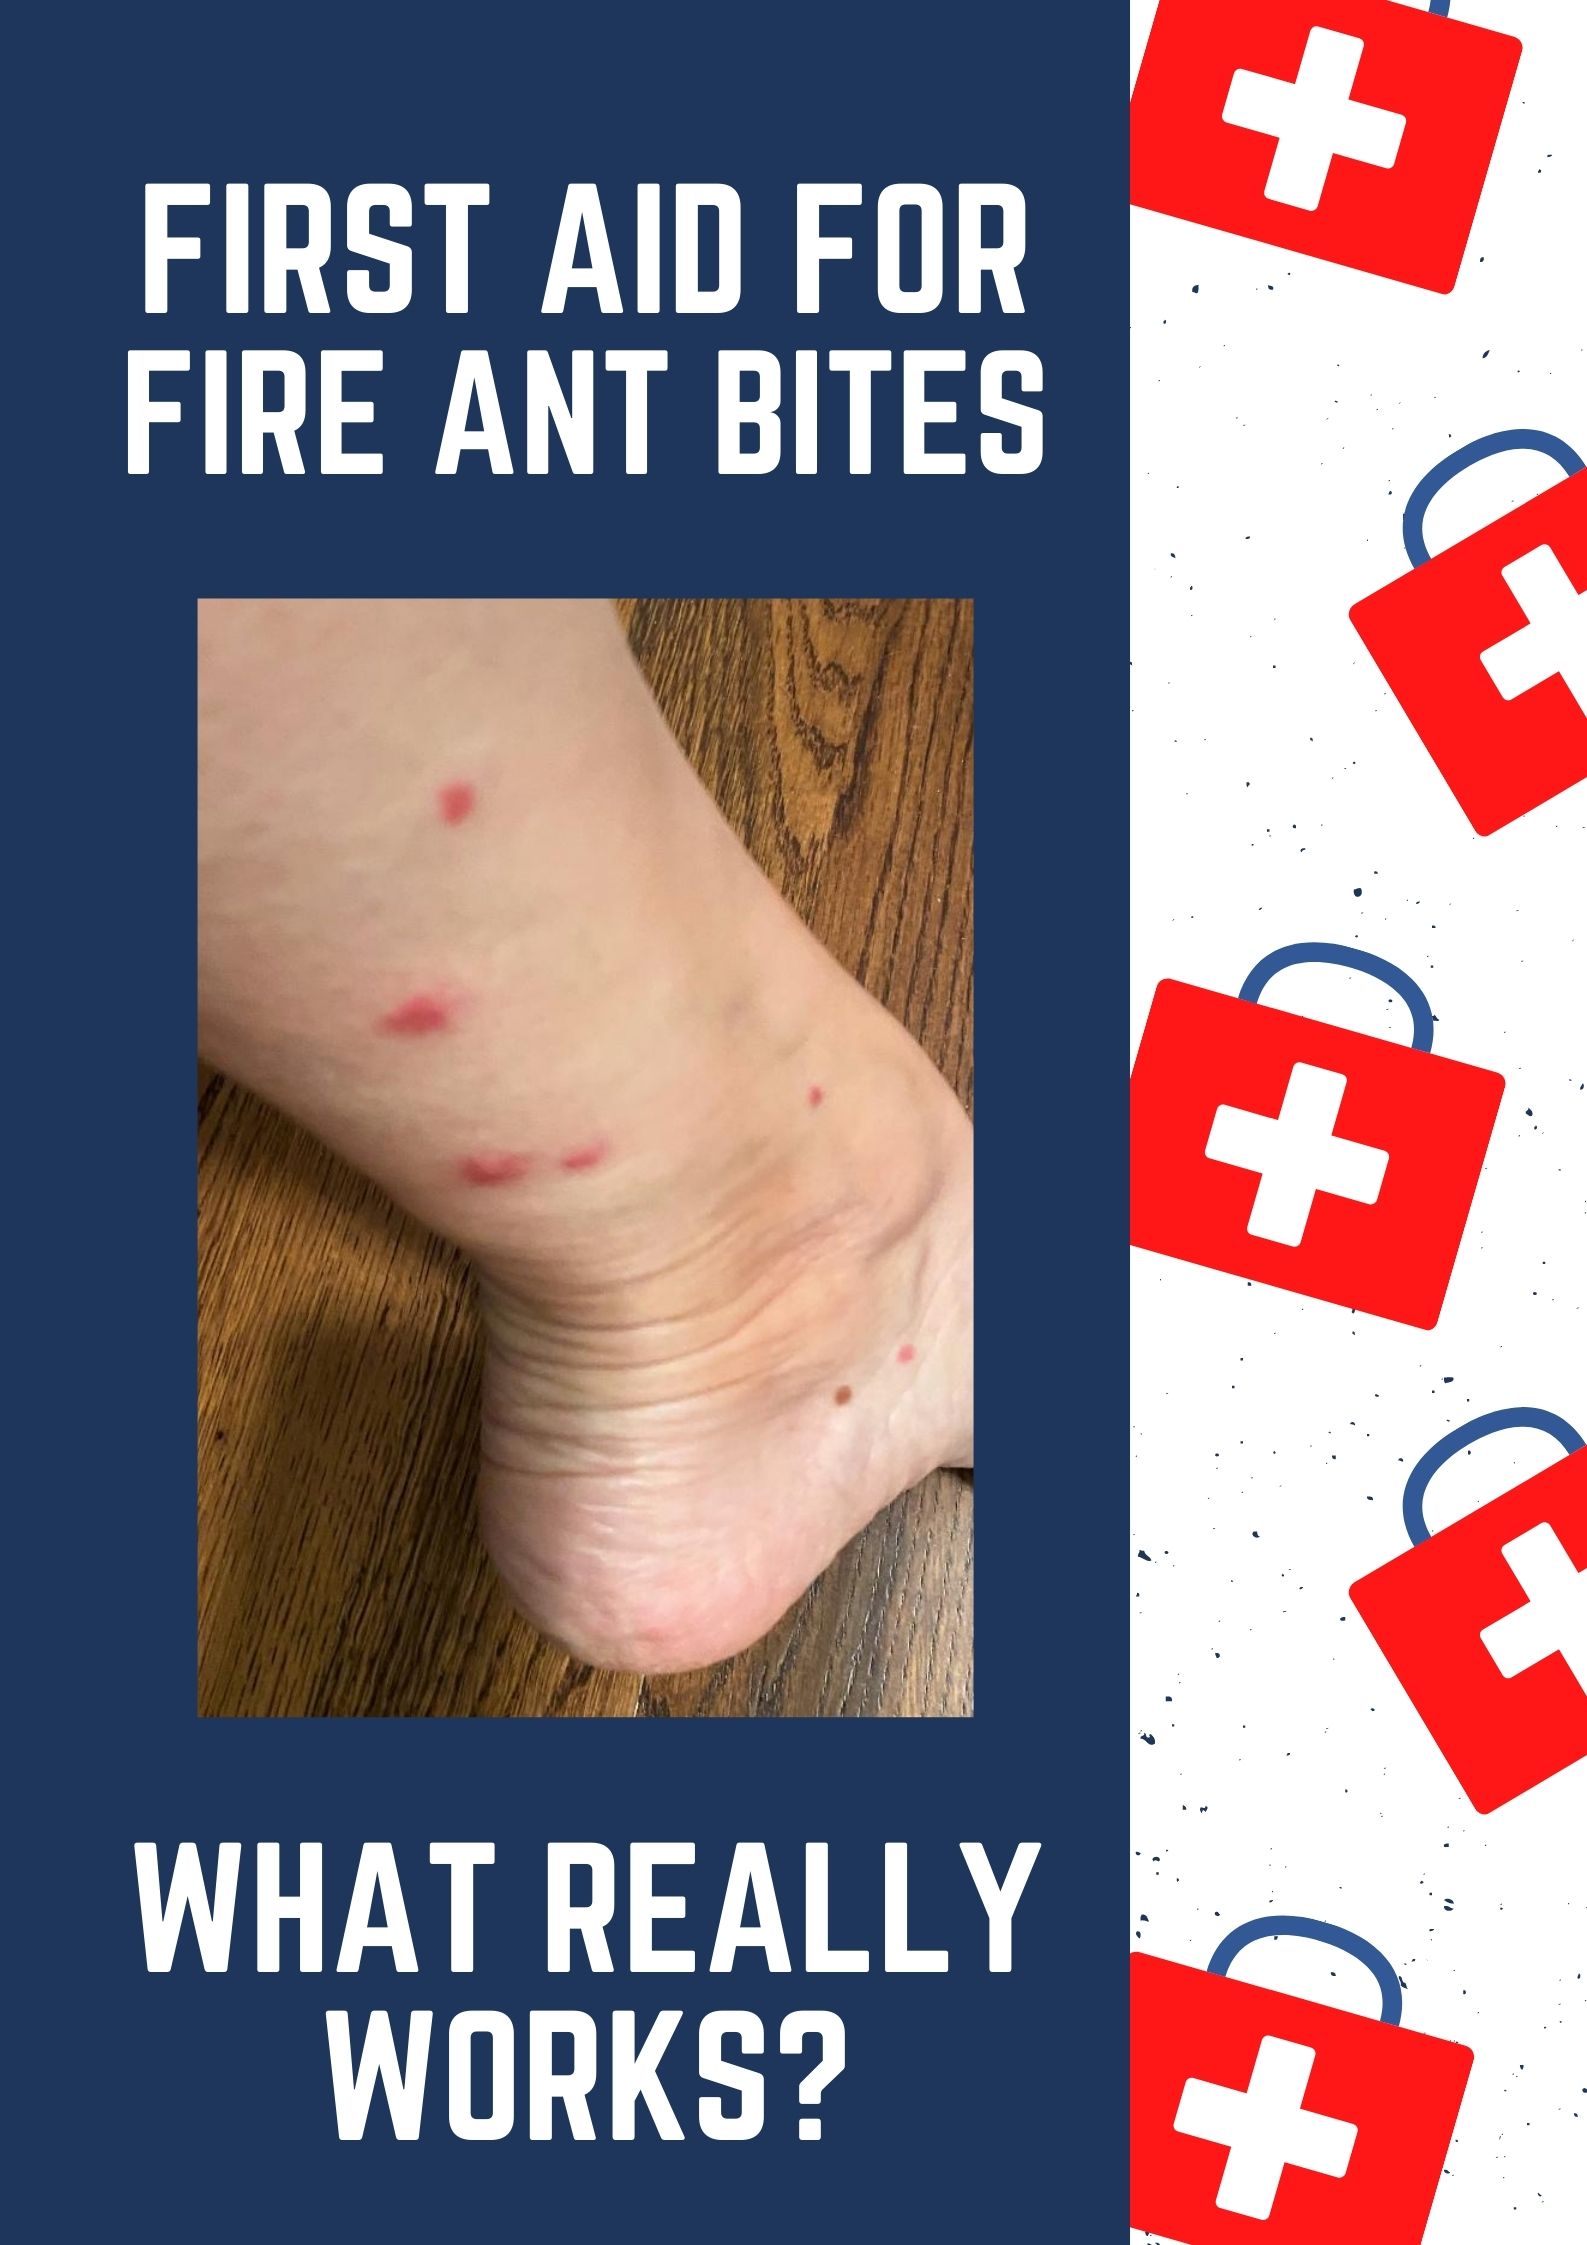 Ever had a fire ant bite? They